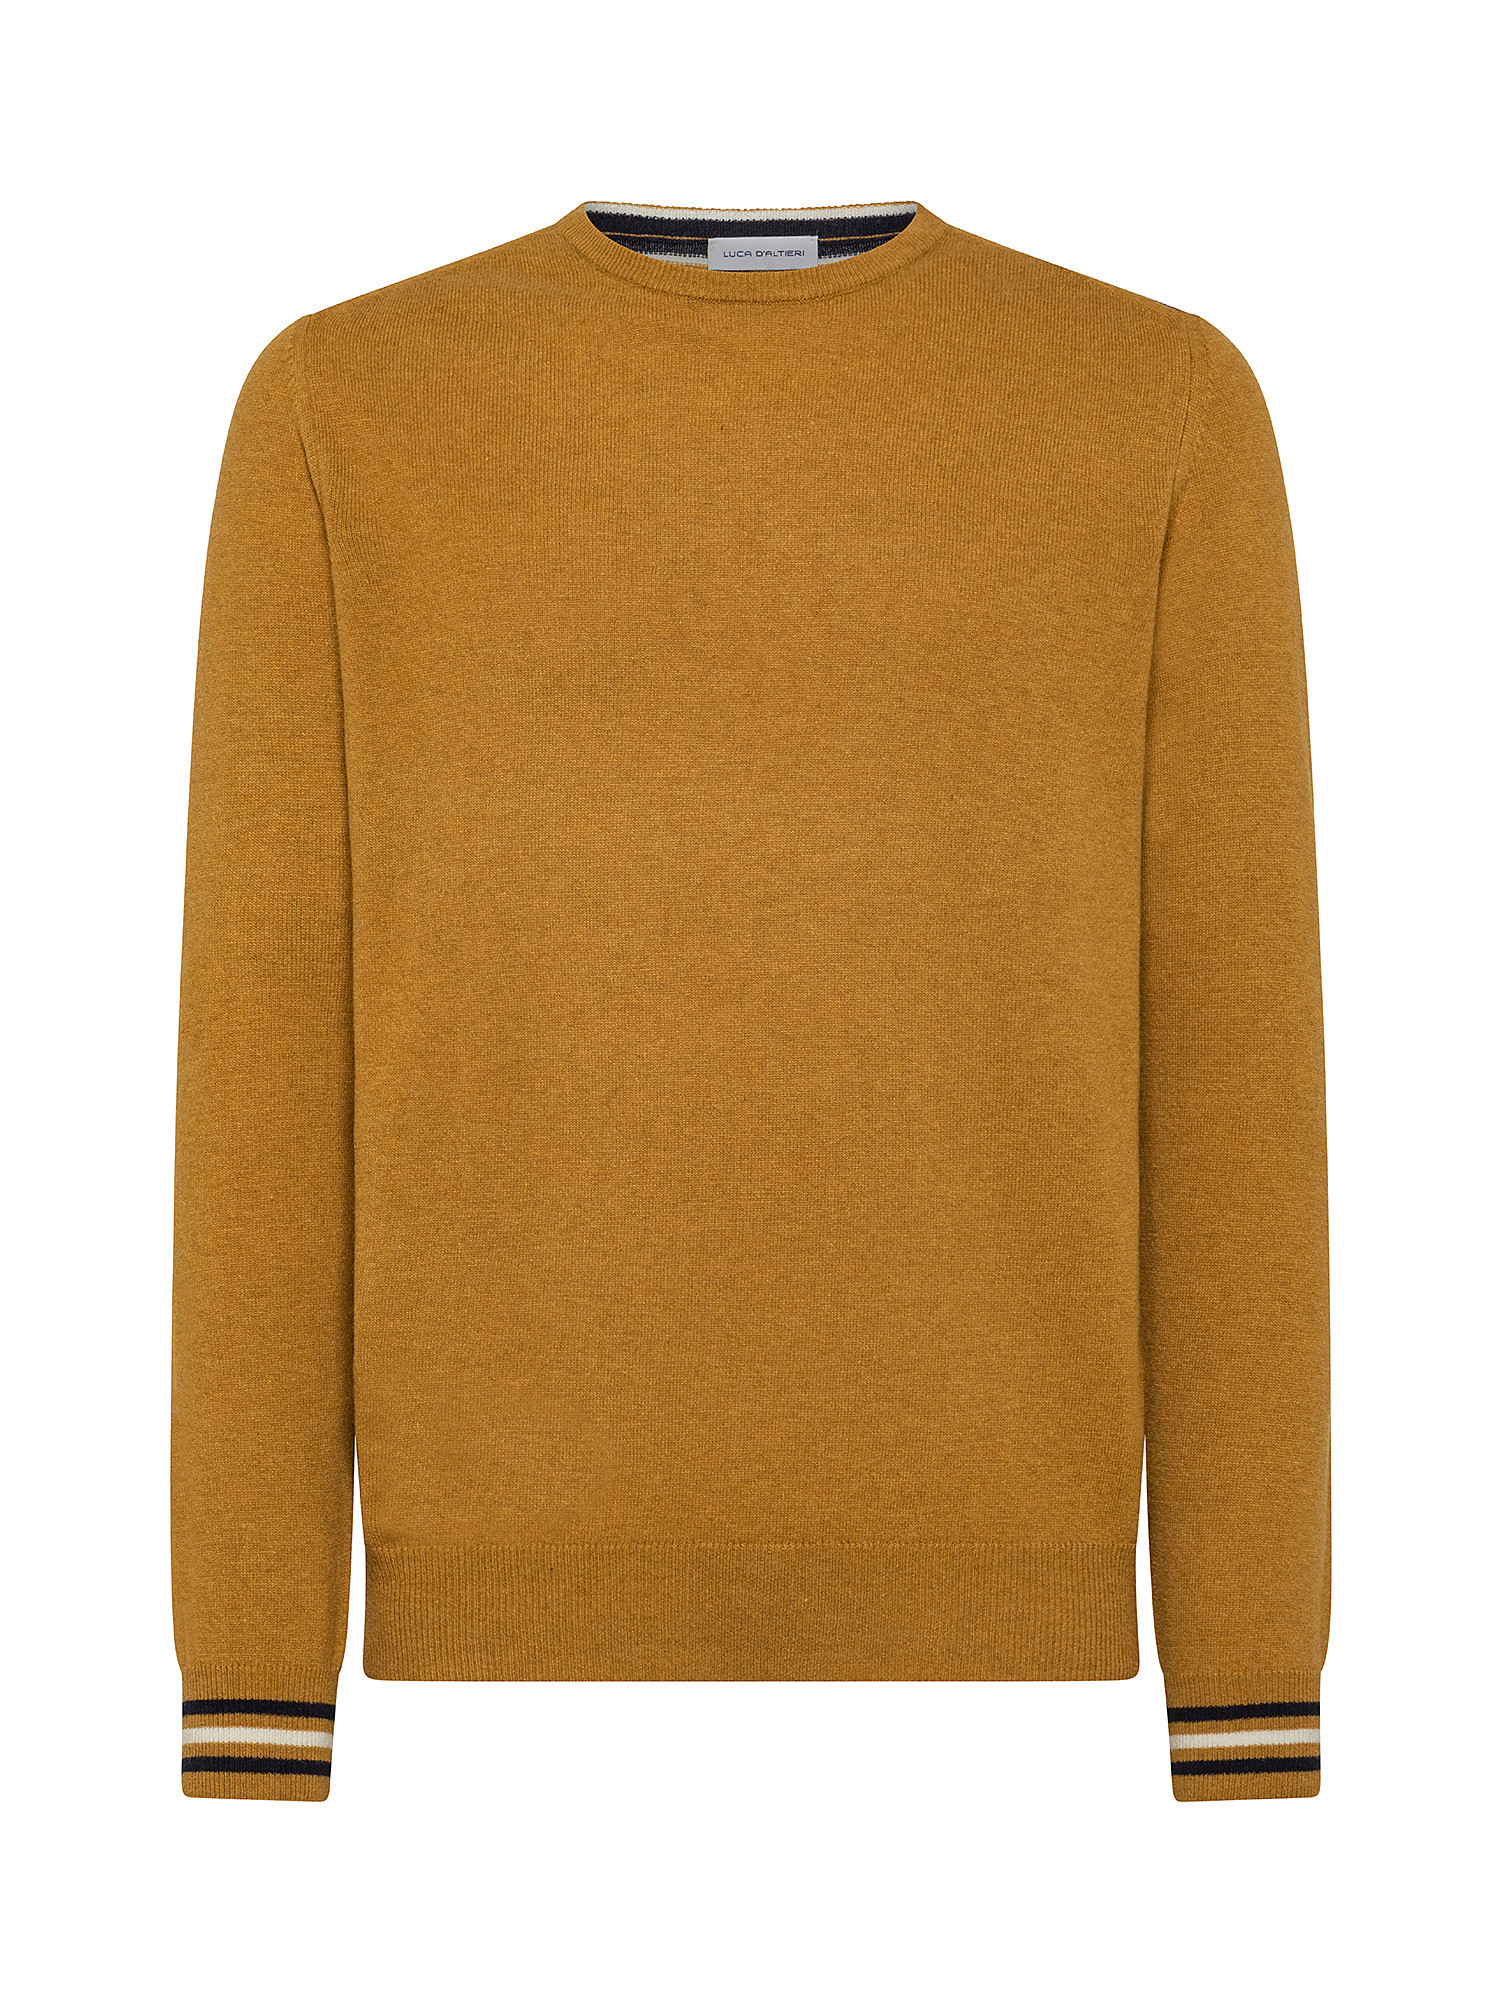 Crewneck sweater with Blend cashmere insert, Ocra Yellow, large image number 0